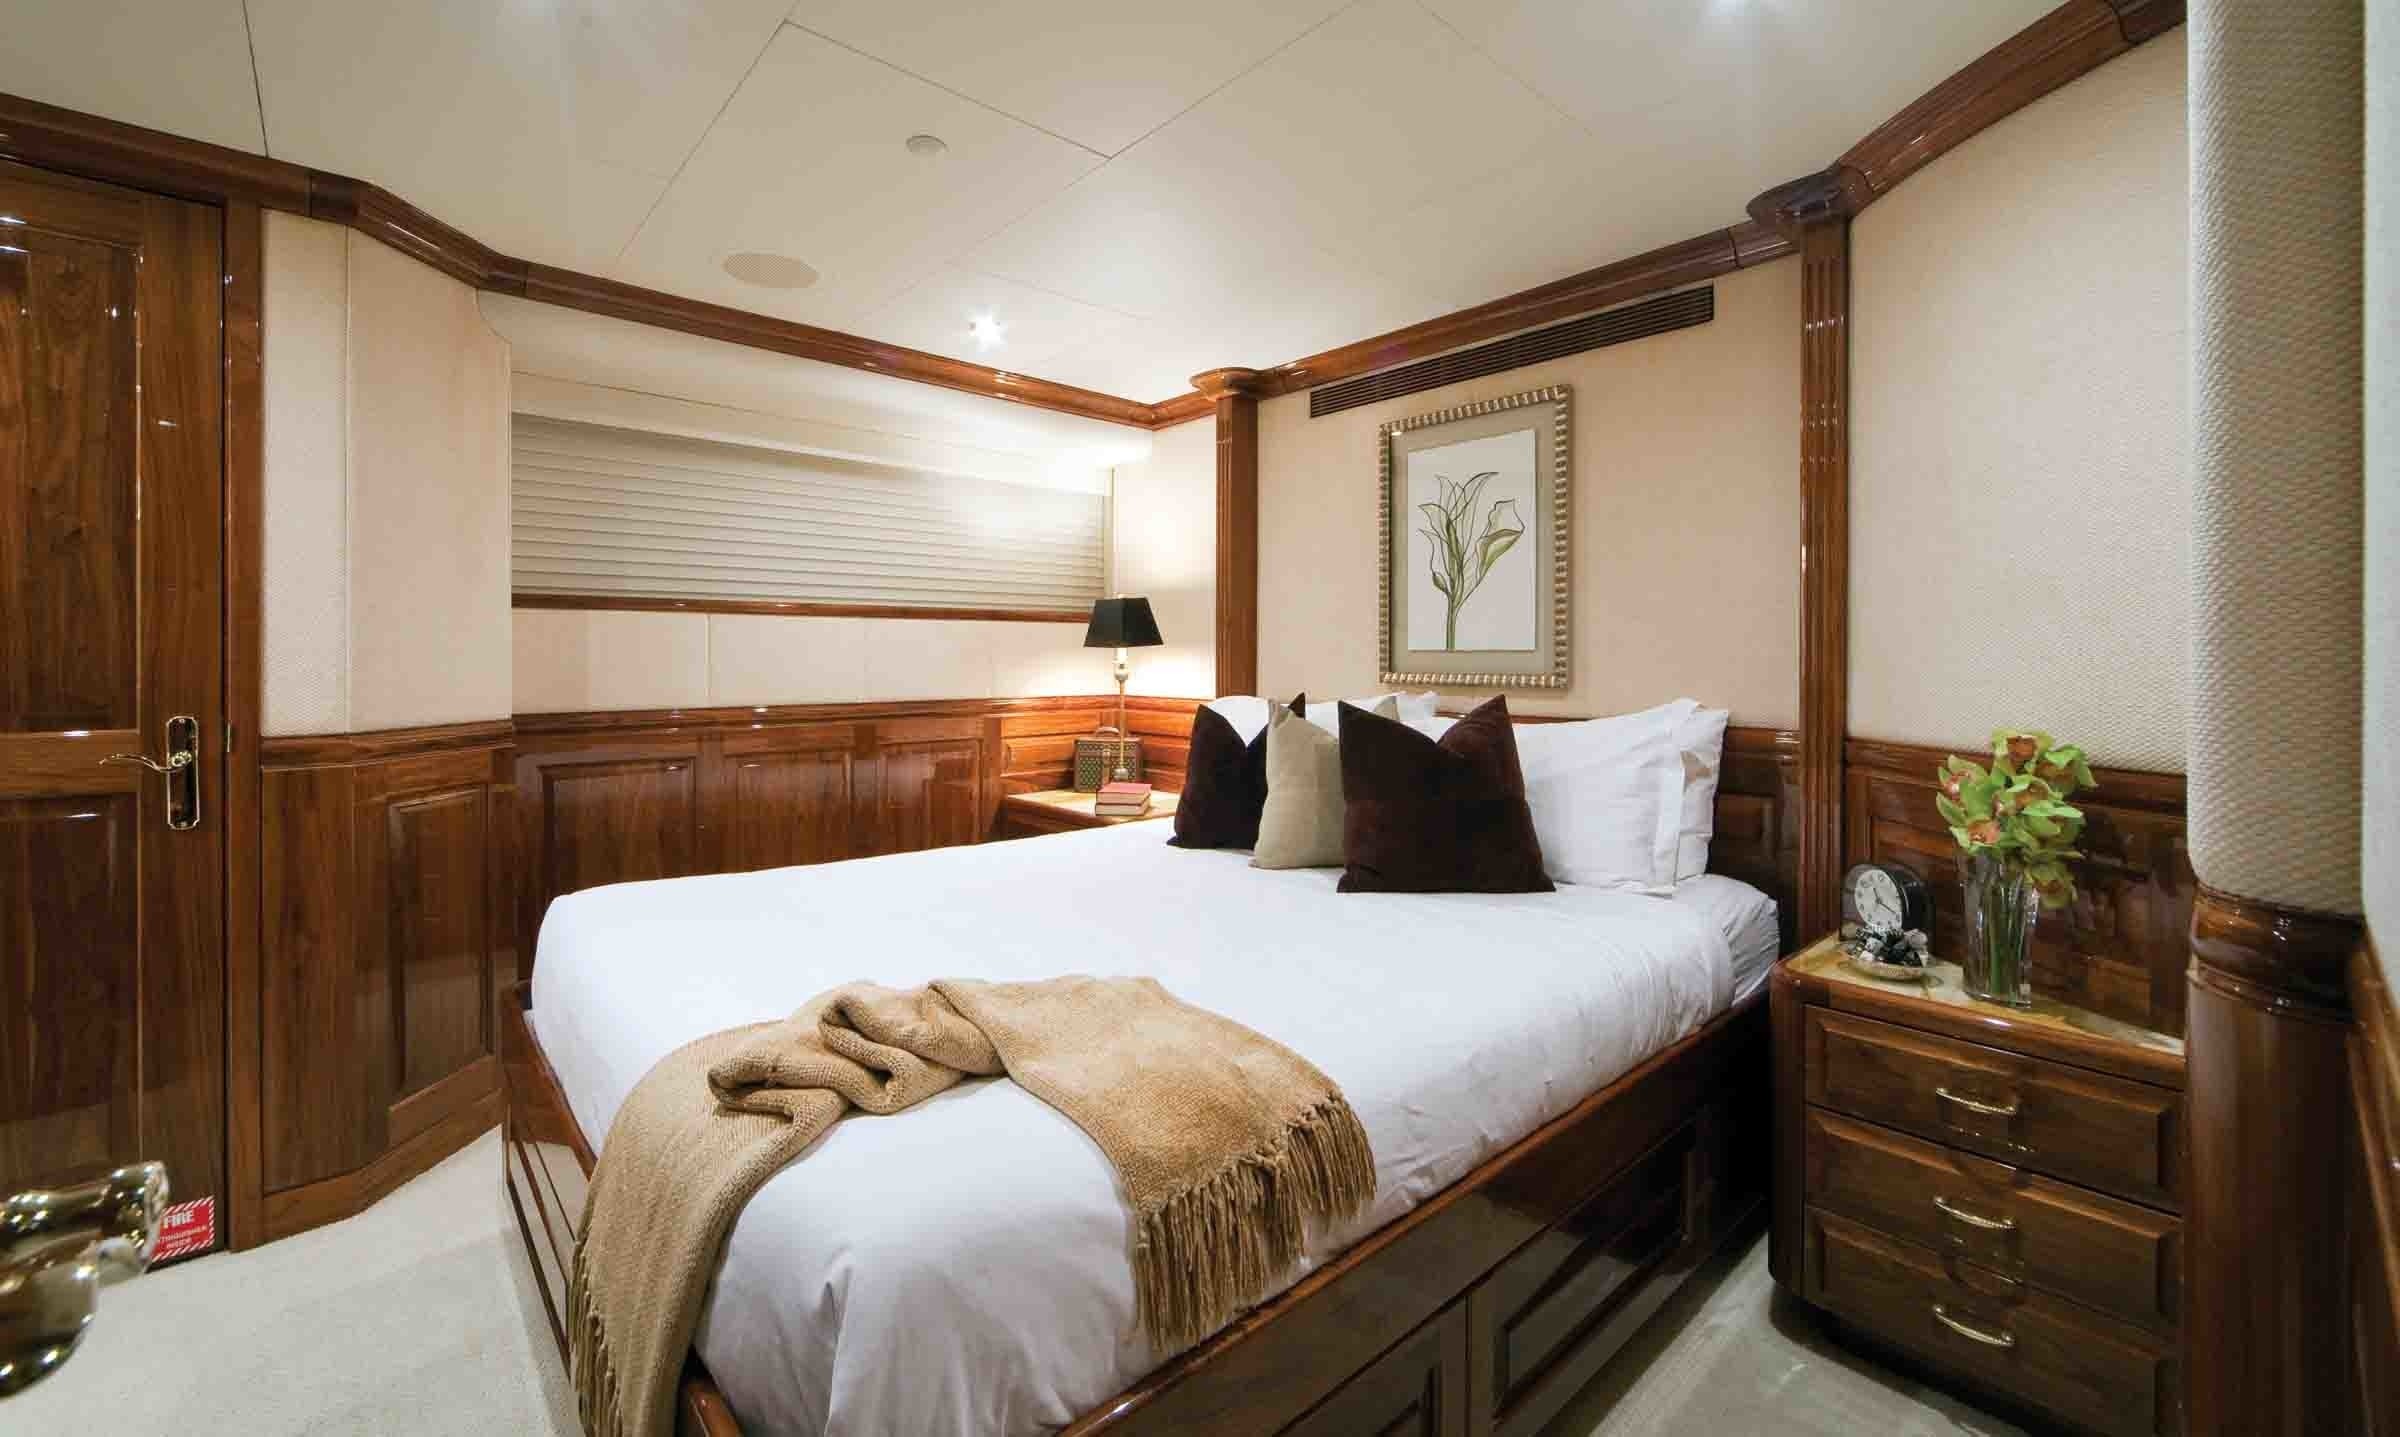 Guest's Cabin On Yacht ONE MORE TOY